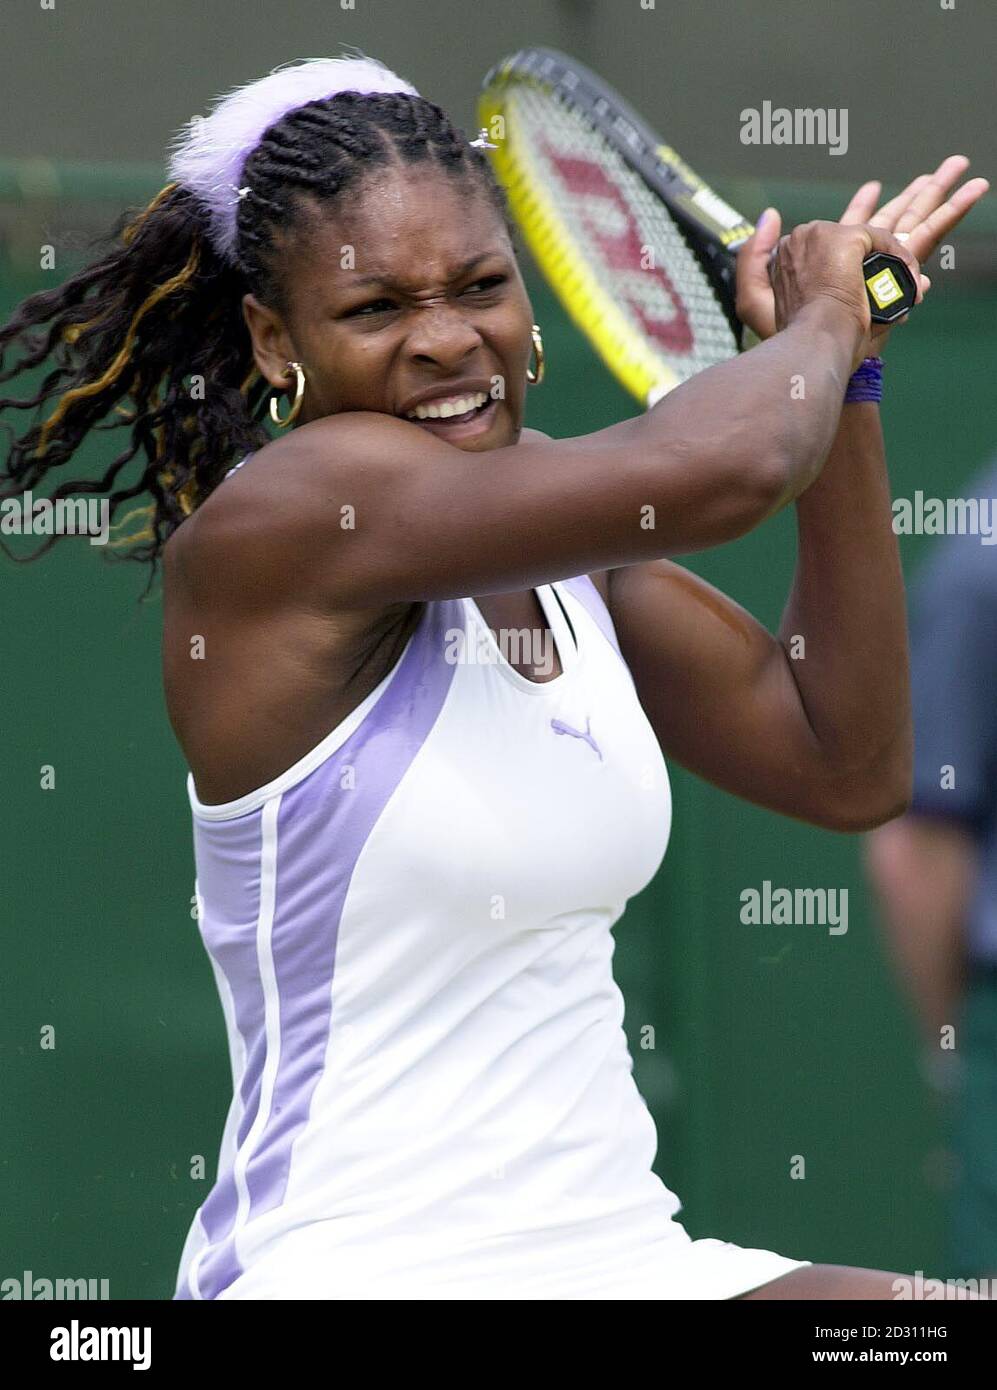 America's Serena Williams in action against Tamarine Tanasugarn of Thailand, during the Lawn tennis Championships at Wimbledon. Stock Photo